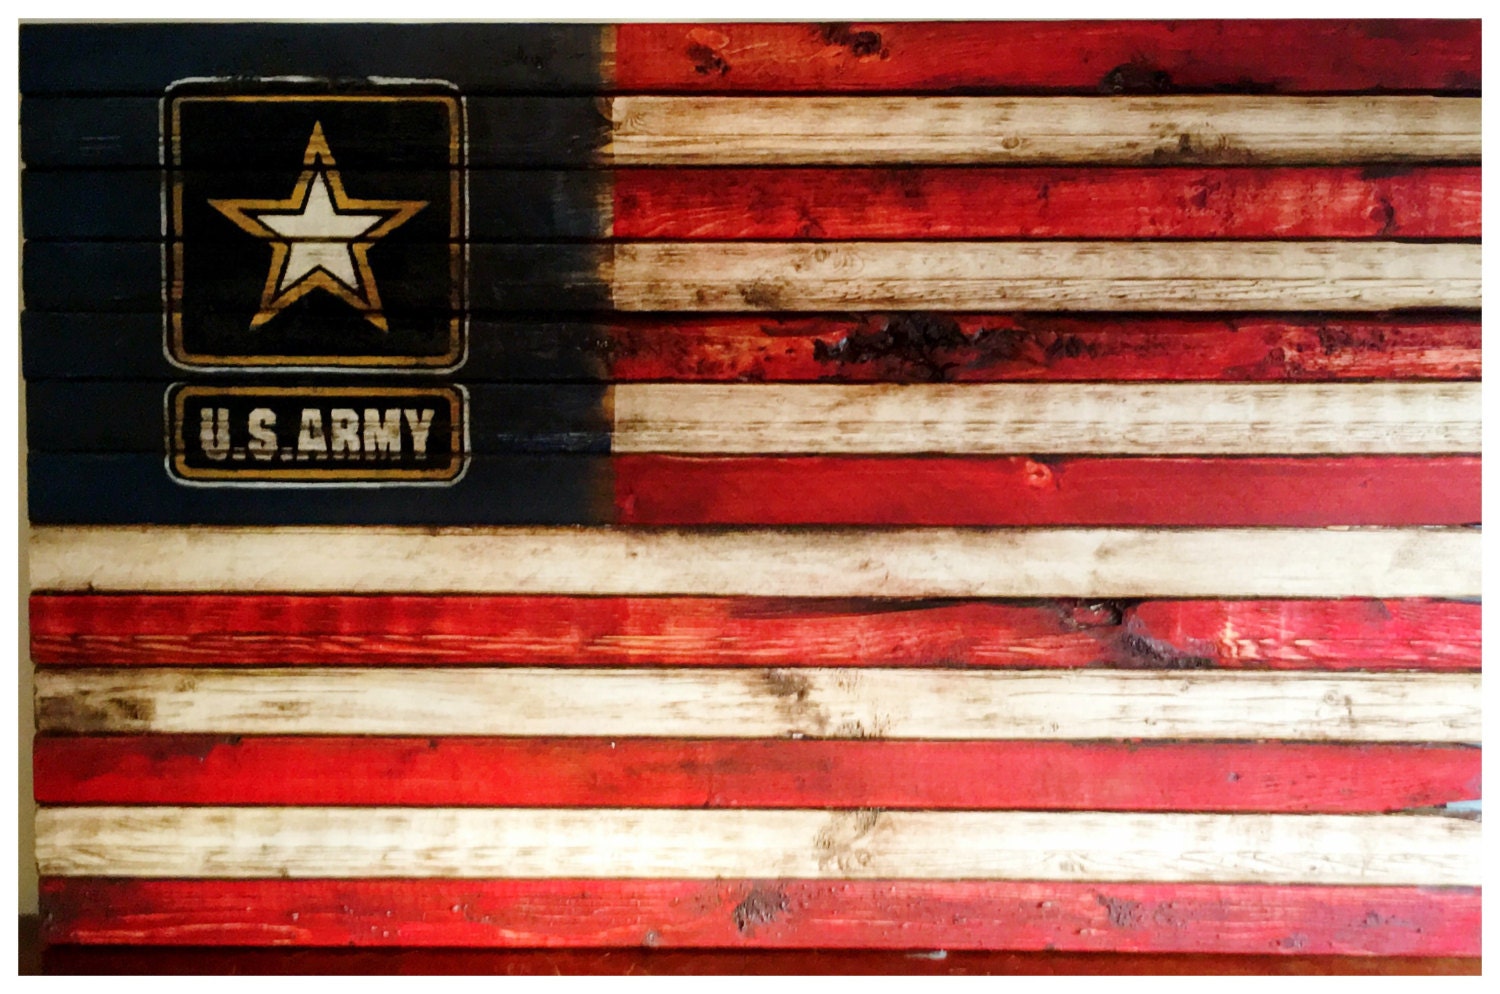  US Army  US Army  Flag  Army  Sign American Flag  Military 